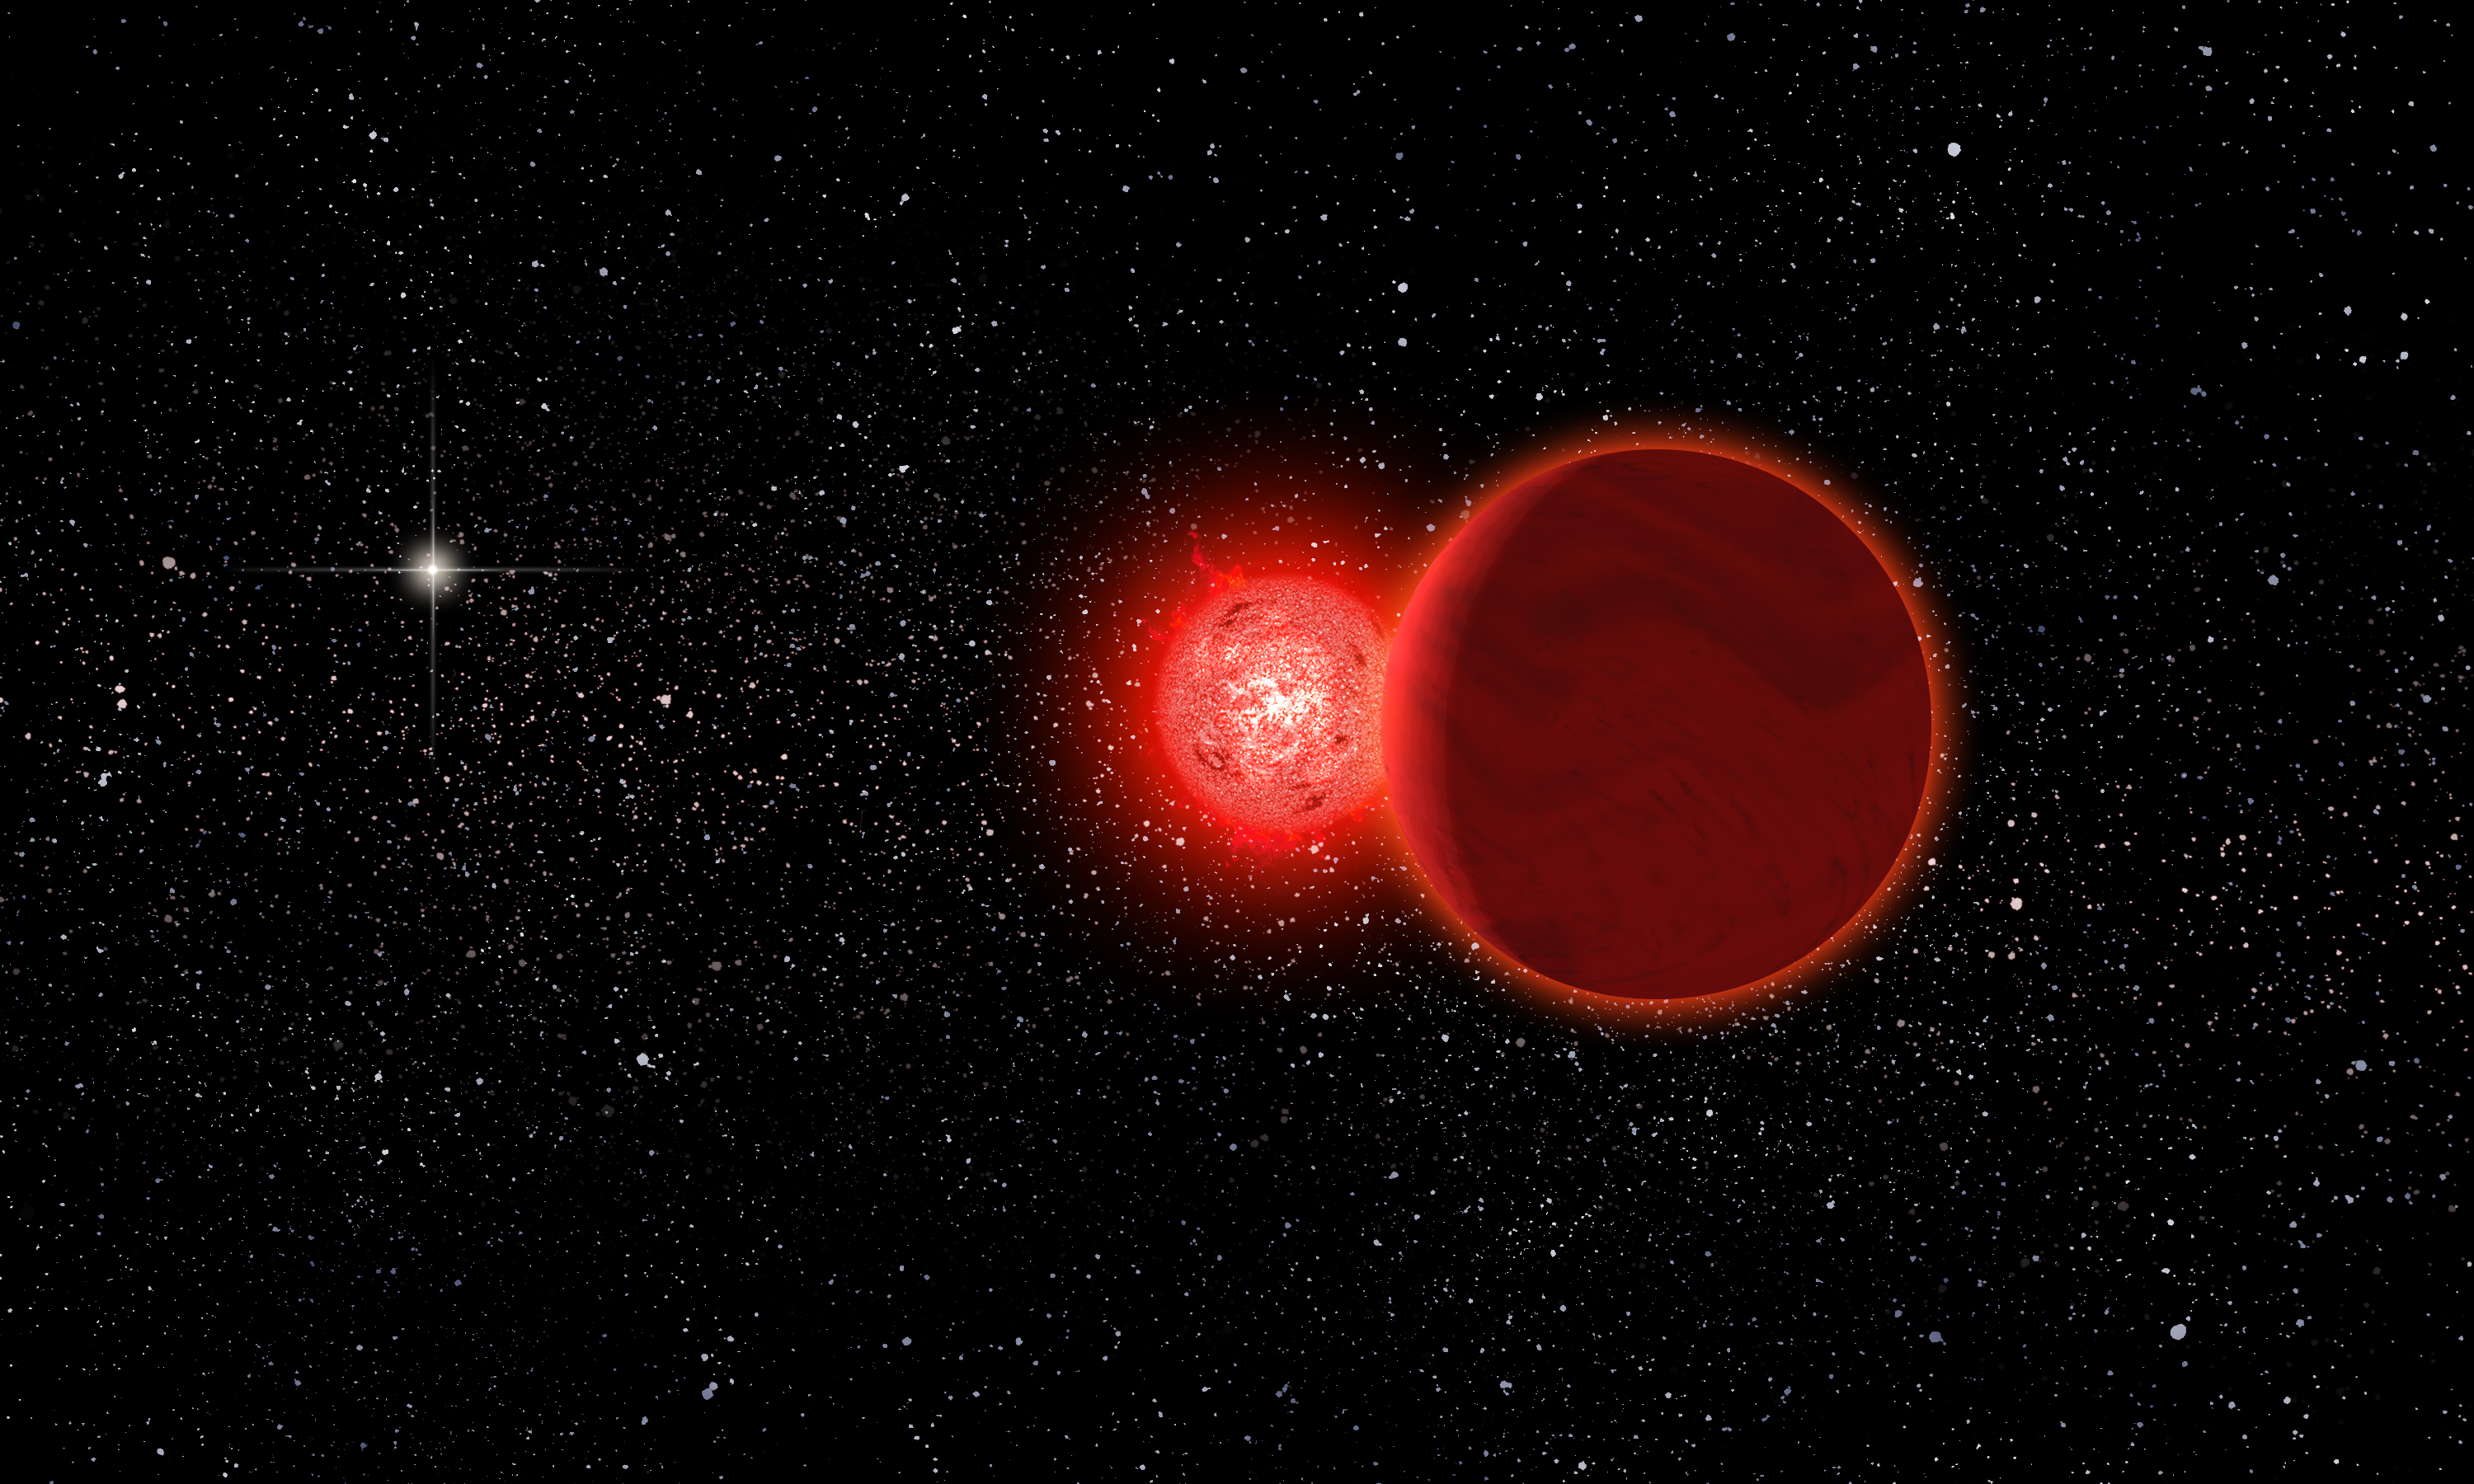 Artist's conception of Scholz's star